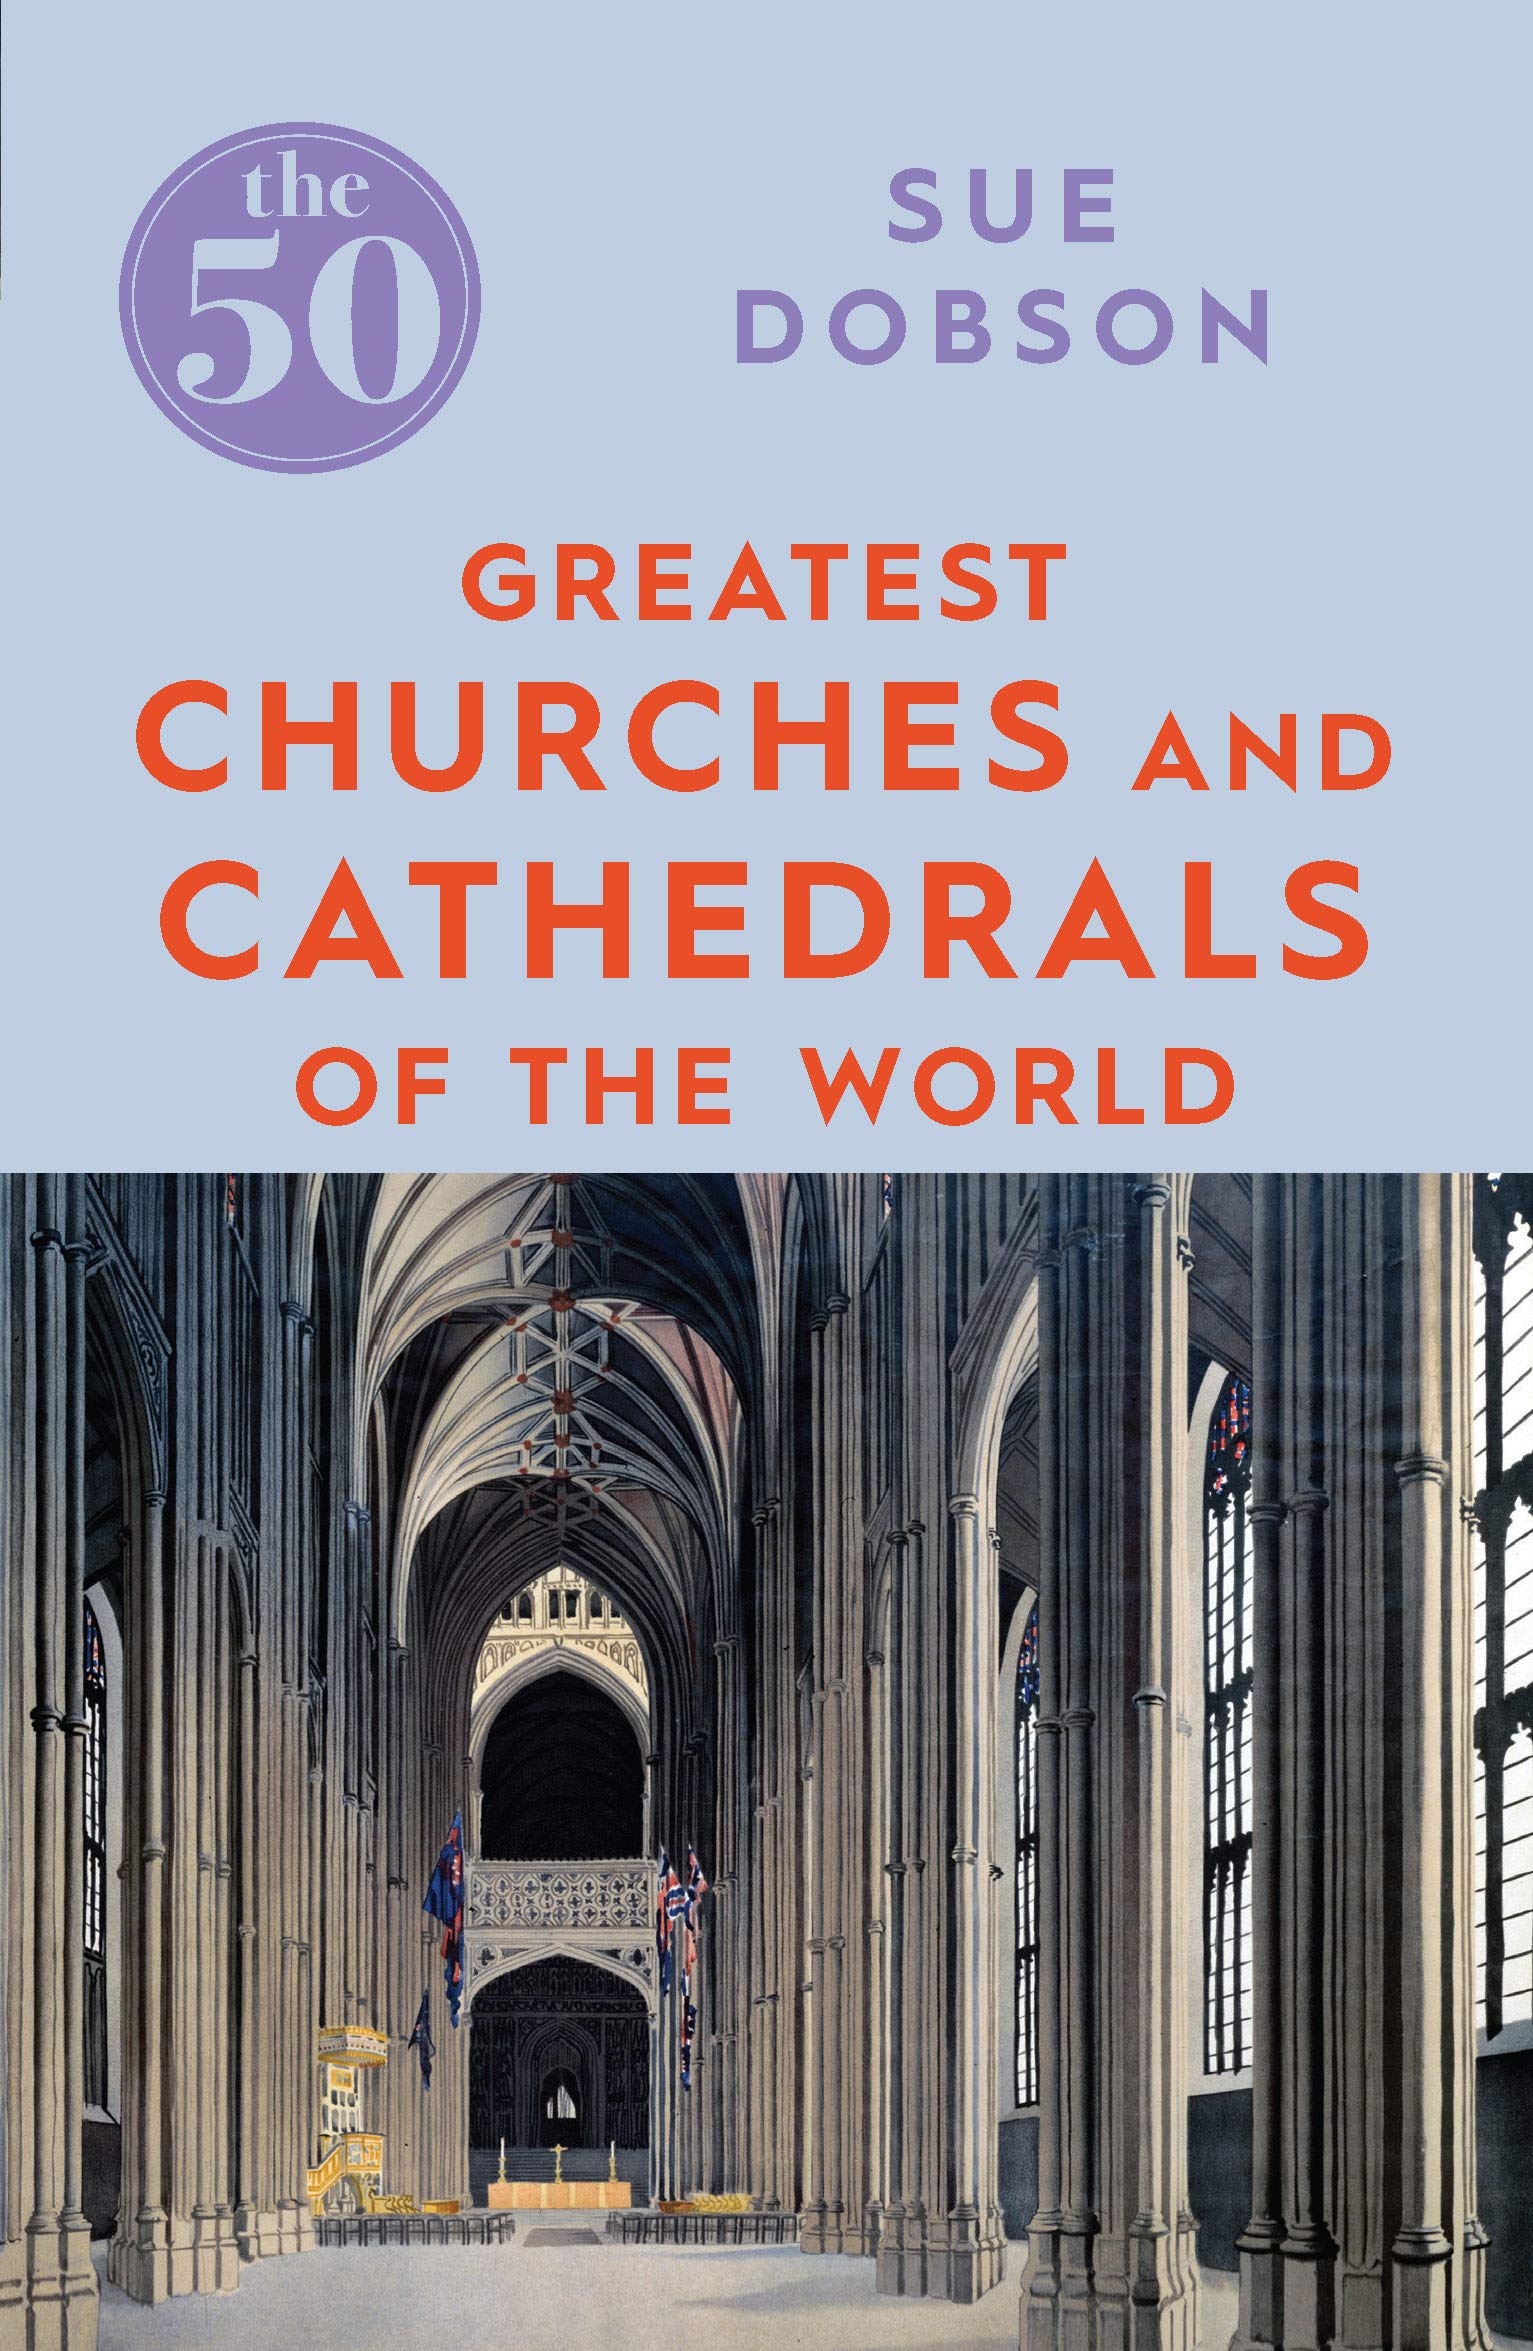 The 50 Greatest Churches and Cathedrals | Sue Dobson